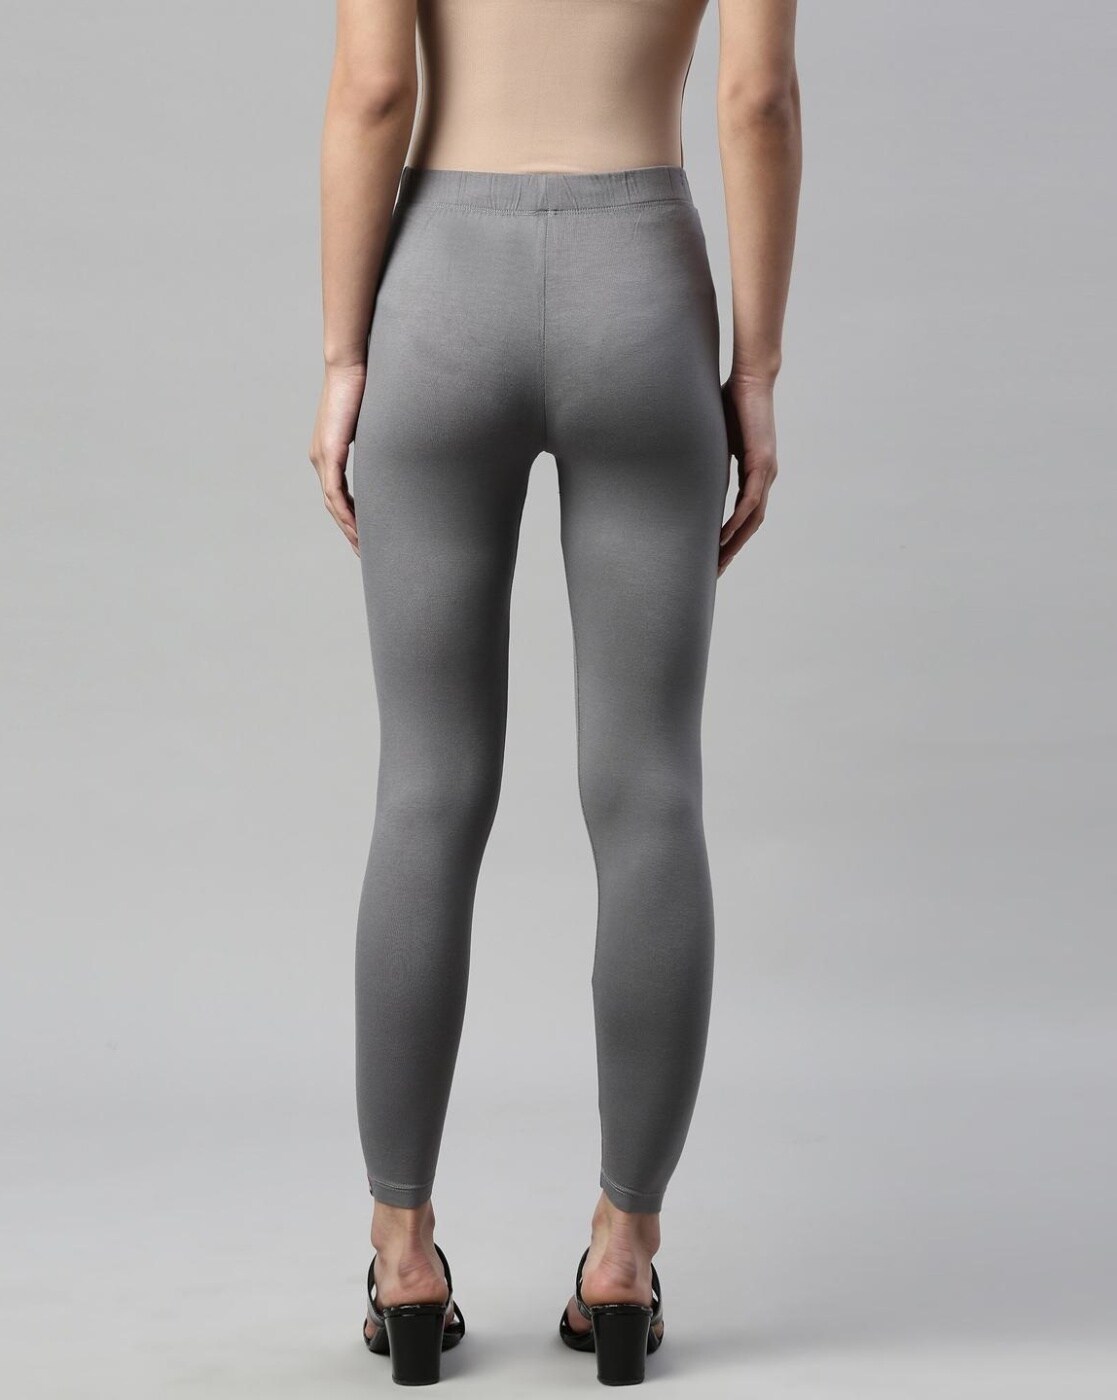 Pack of 3 Ankle Length Leggings with Elasticated Waistband